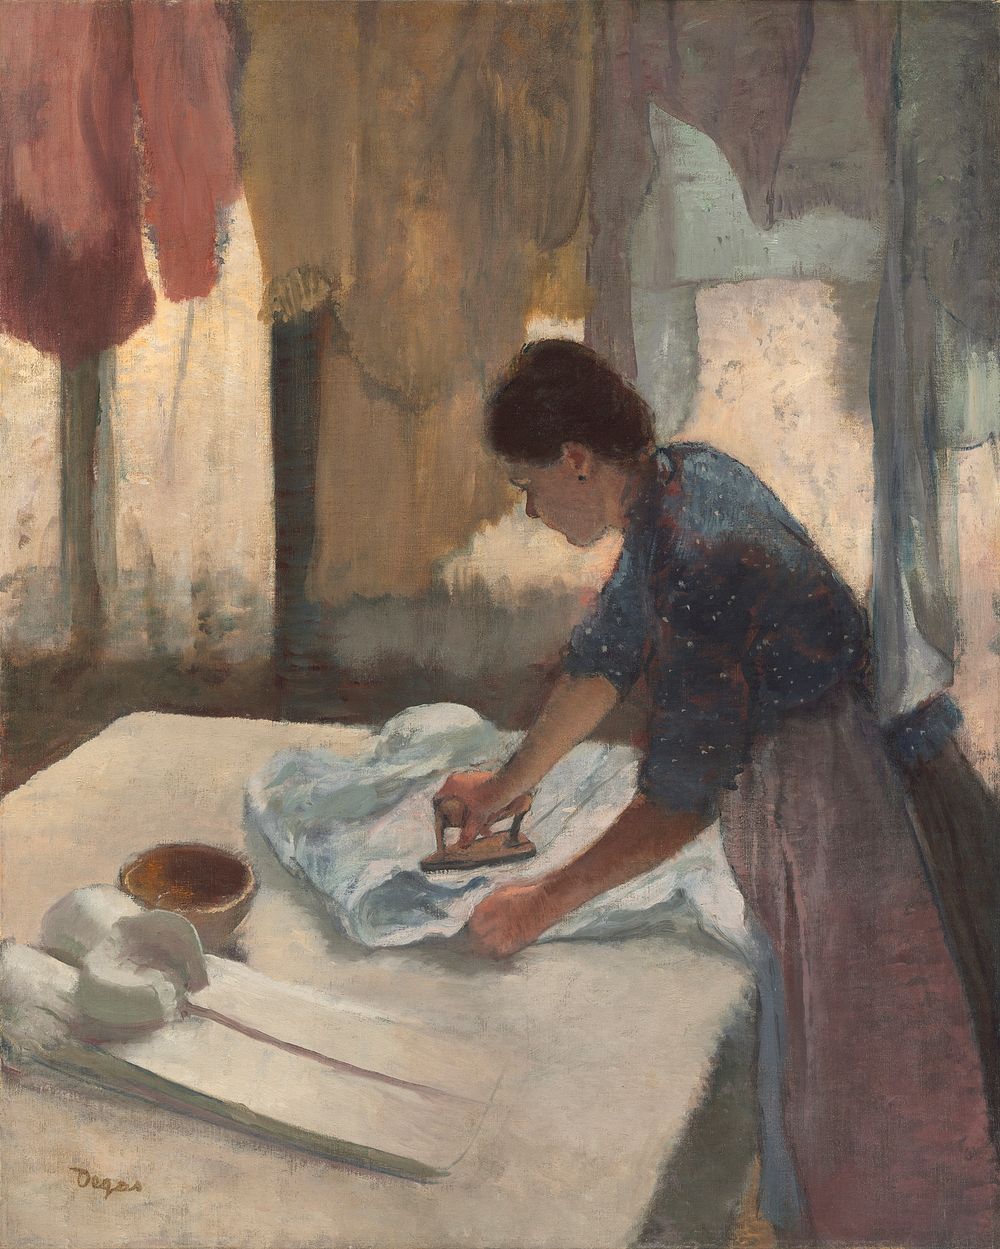 Woman Ironing (begun in 1876 and completed in 1887) by Edgar Degas. 